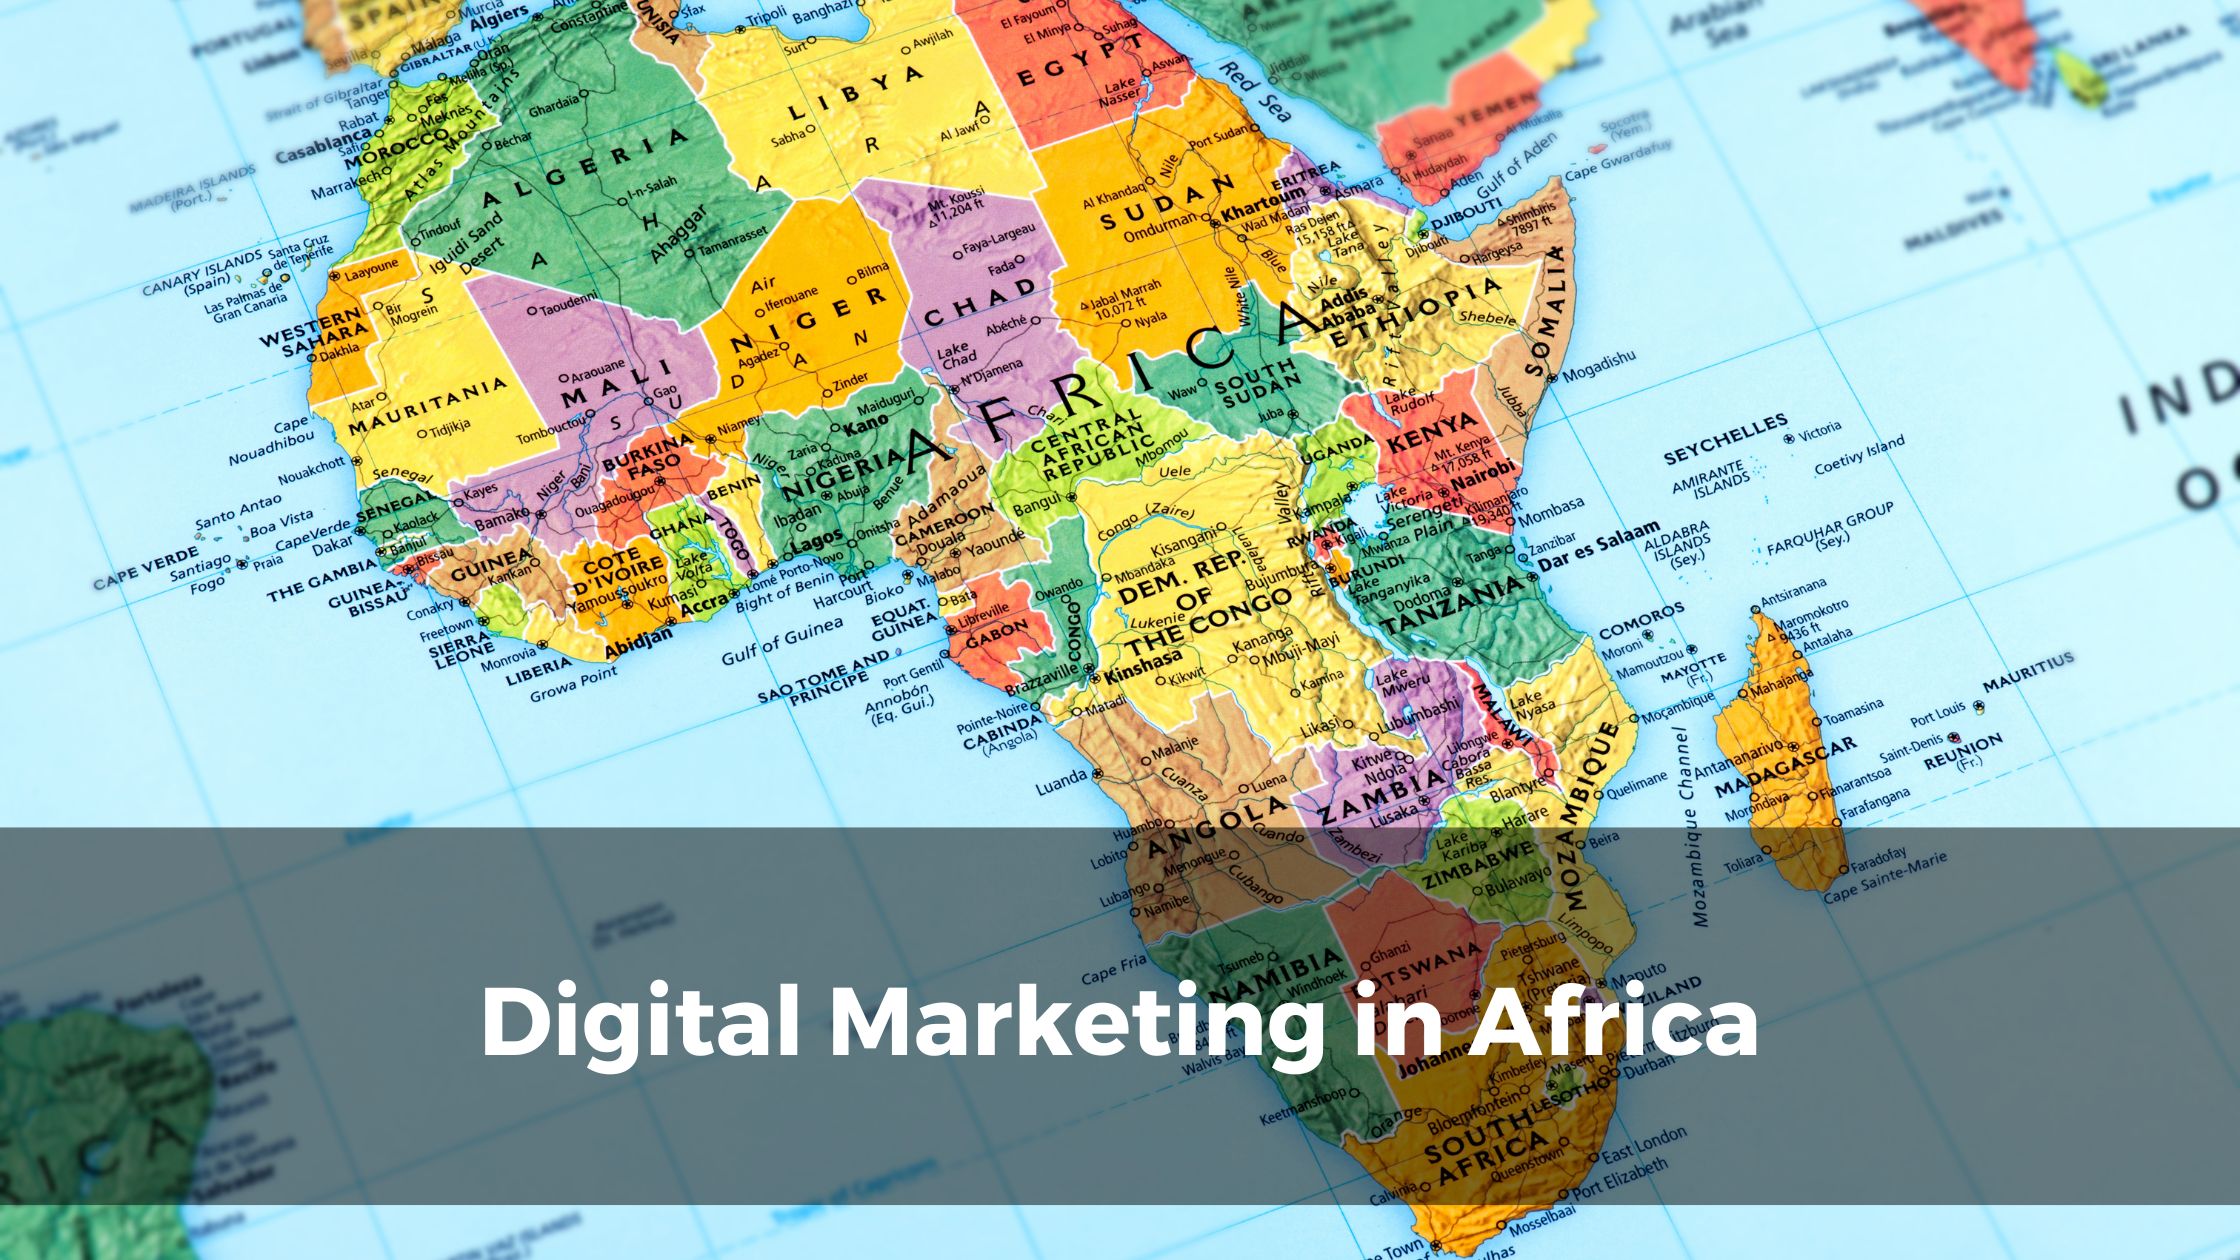 Digital Marketing in Africa - The Importance and the Growth